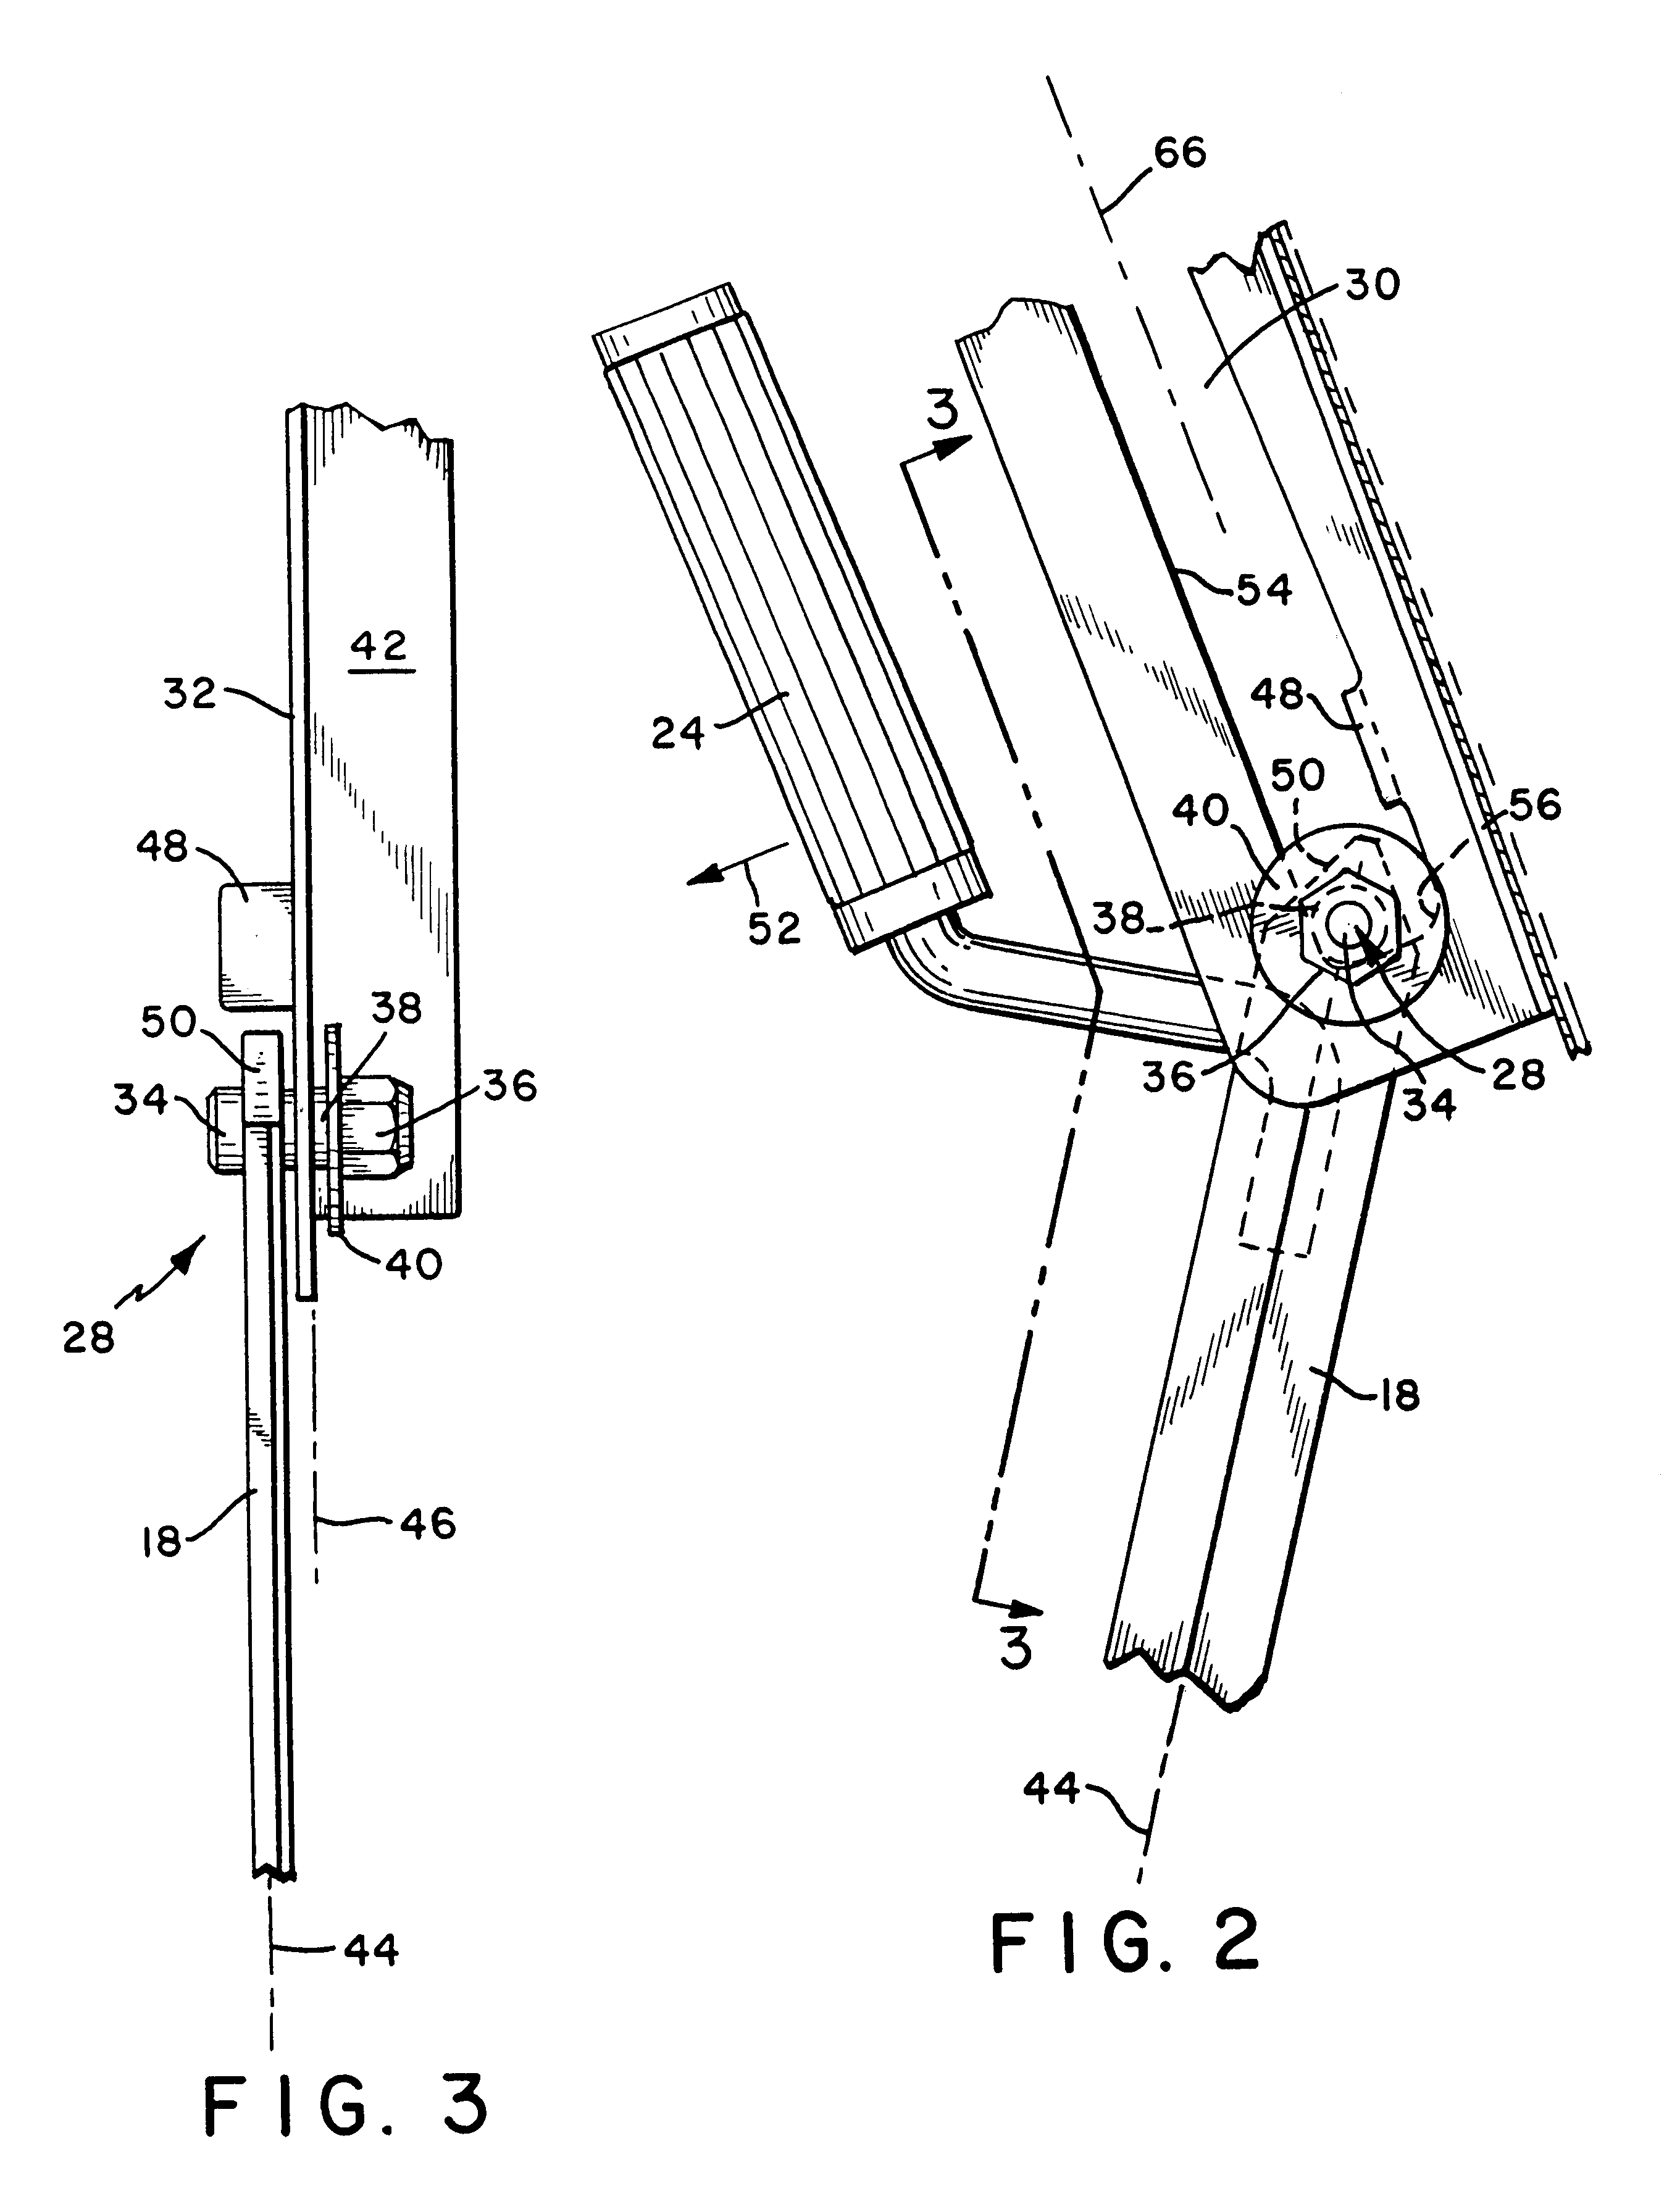 Hold open arm assembly